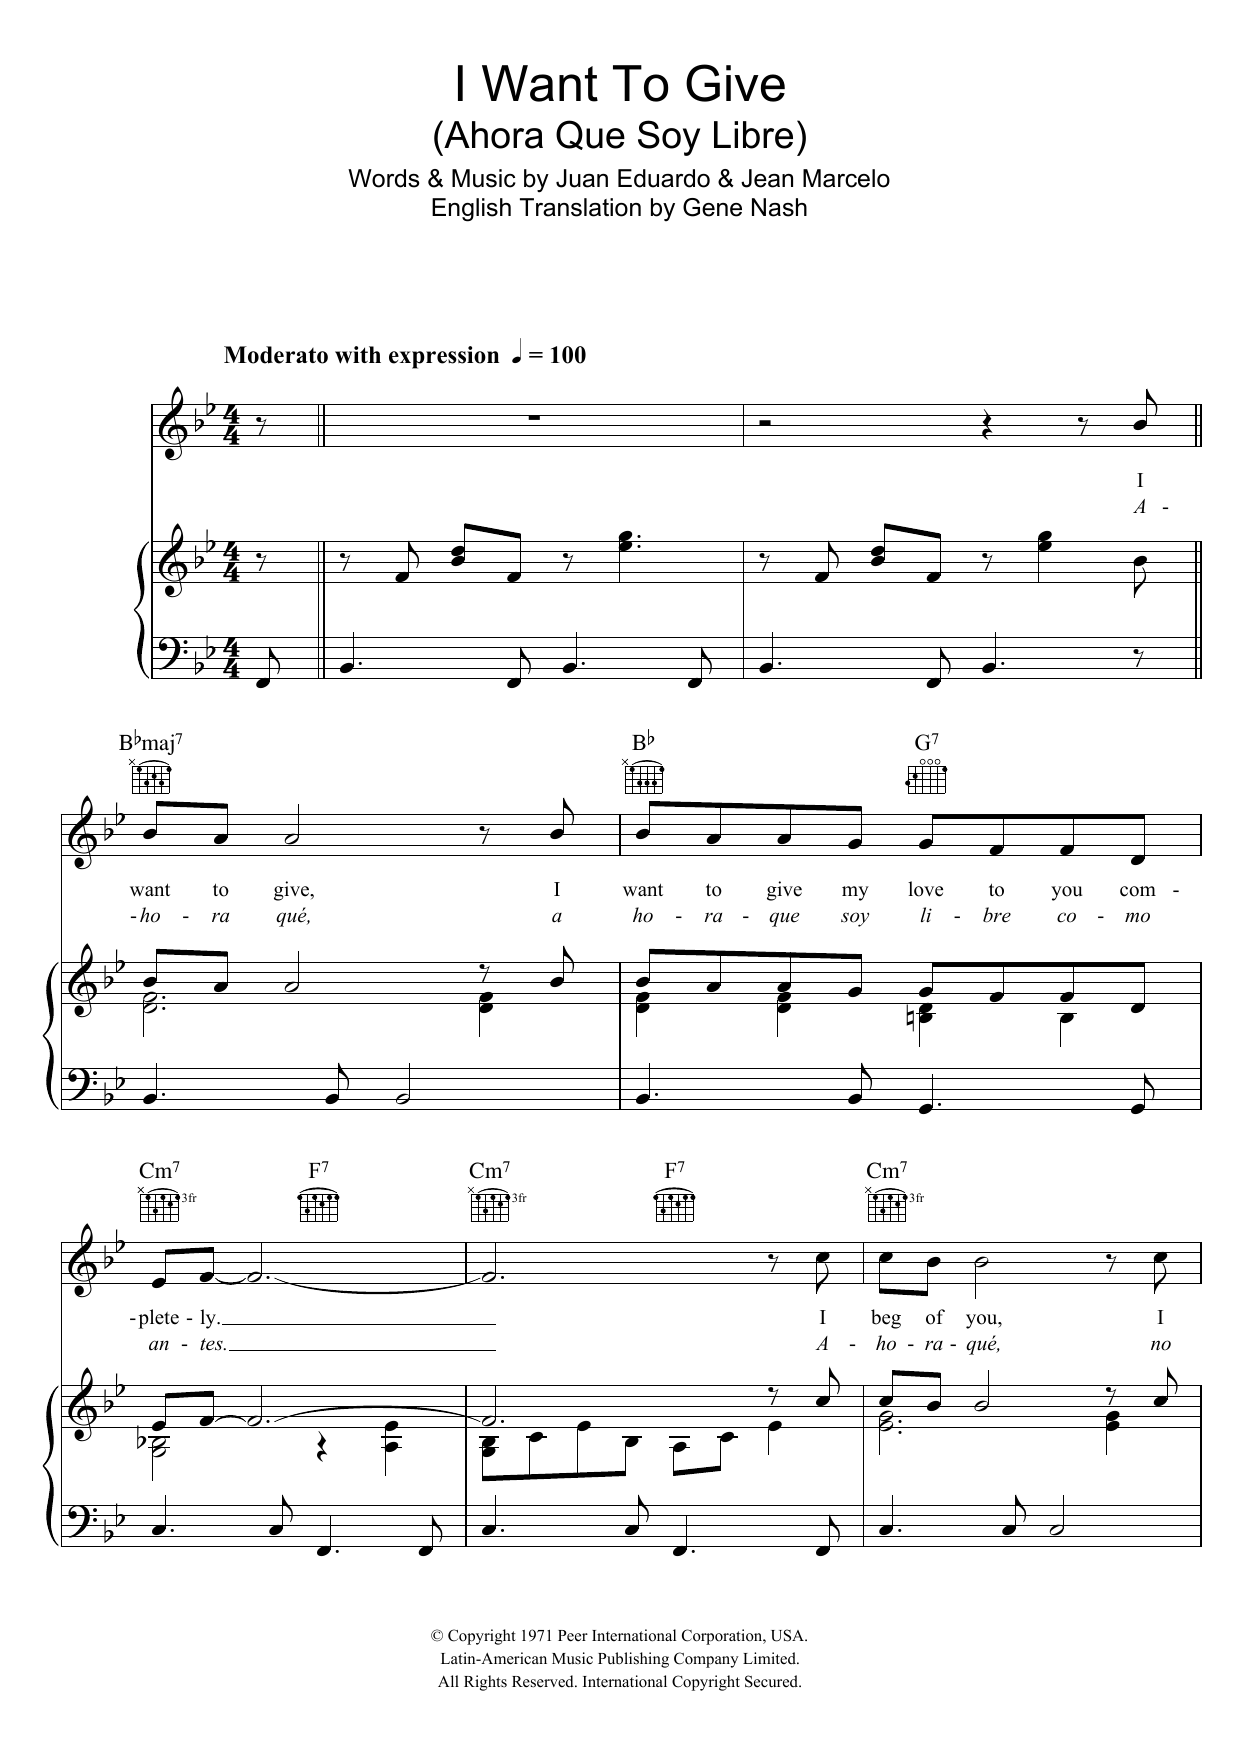 Download Perry Como I Want To Give (Ahora Que Soy Libre) Sheet Music